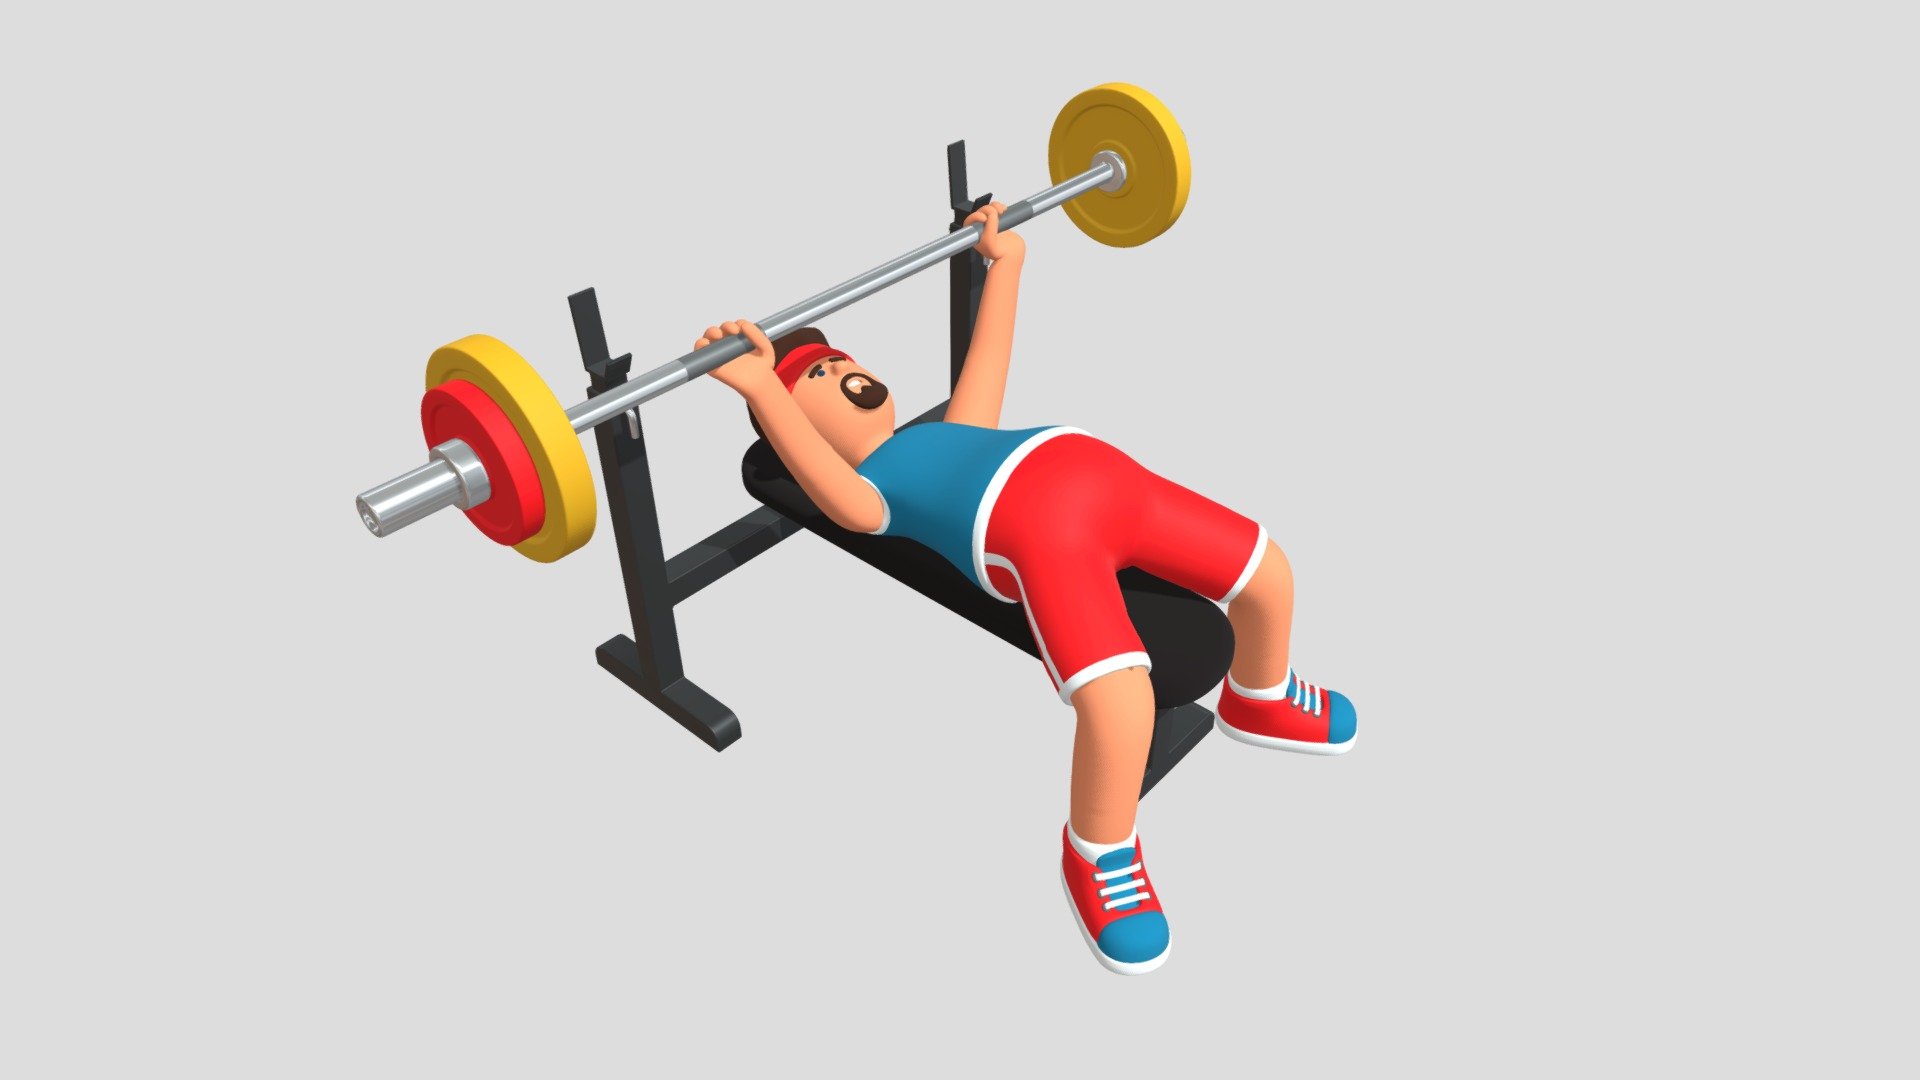 3d man training bench press with barbell. Cartoon 3d animation.
Made in blender 3D 3d model